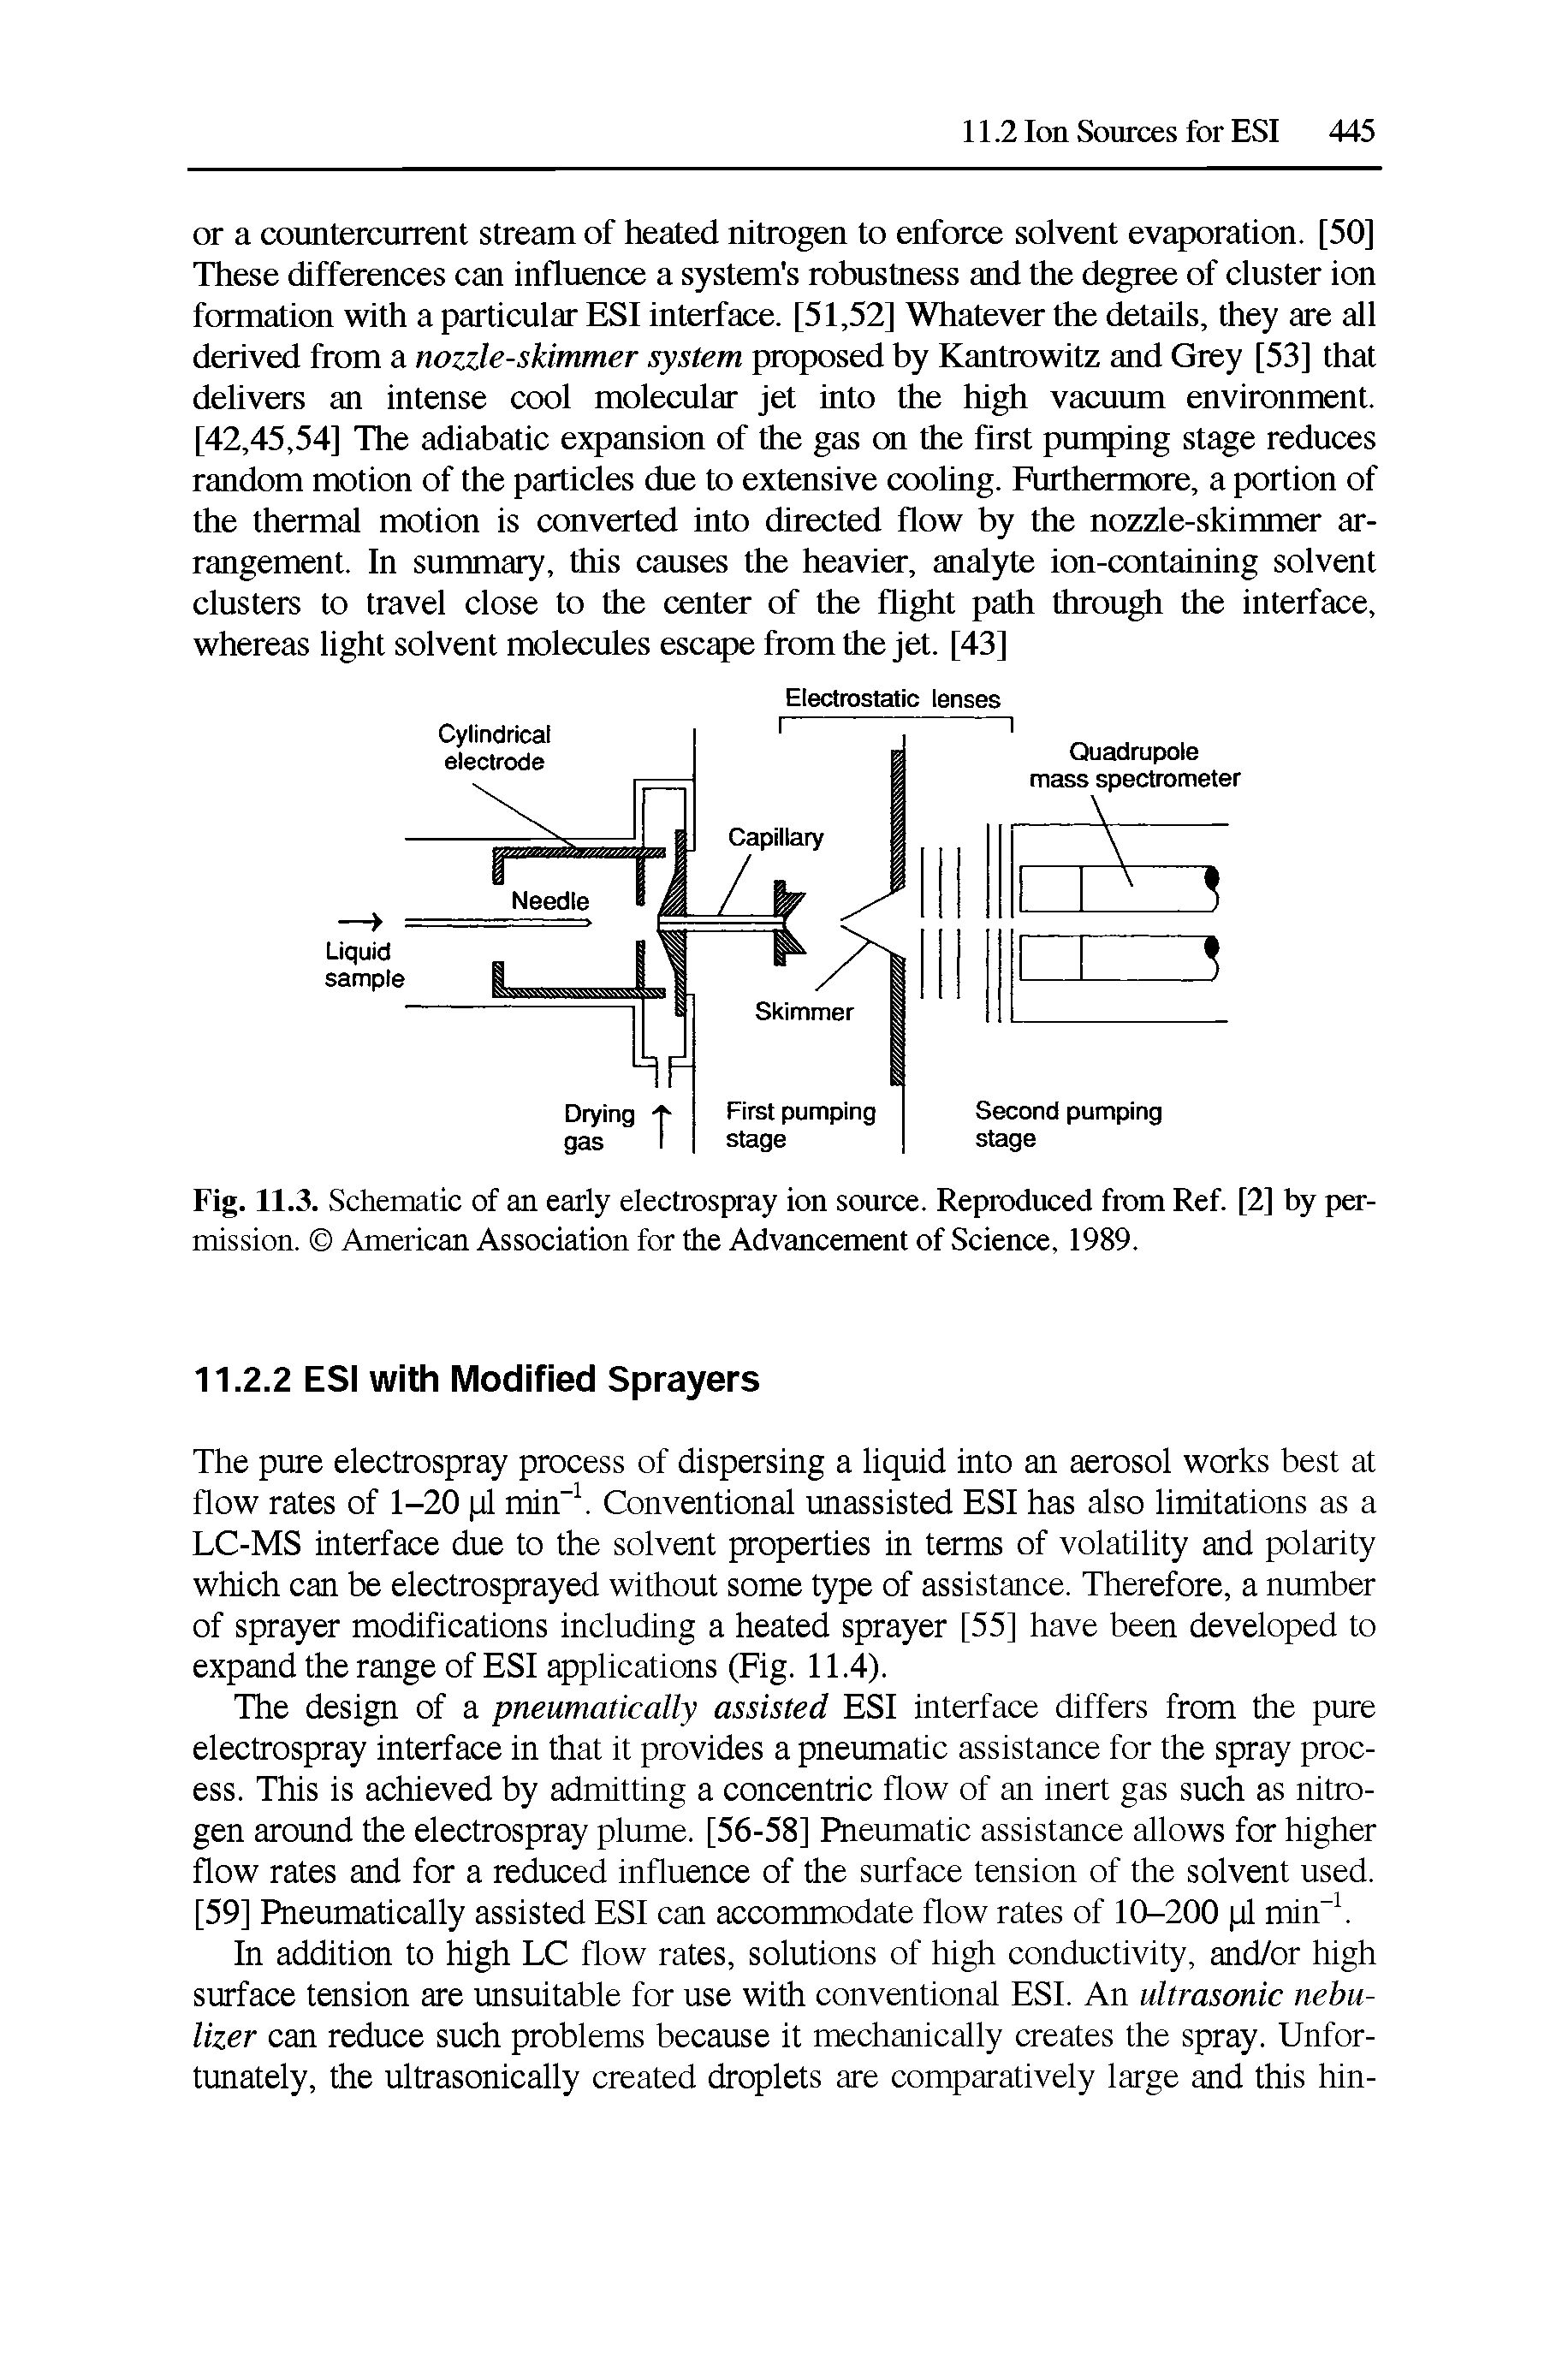 Fig. 11.3. Schematic of an early electrospray ion source. Reproduced from Ref. [2] by permission. American Association for the Advancement of Science, 1989.